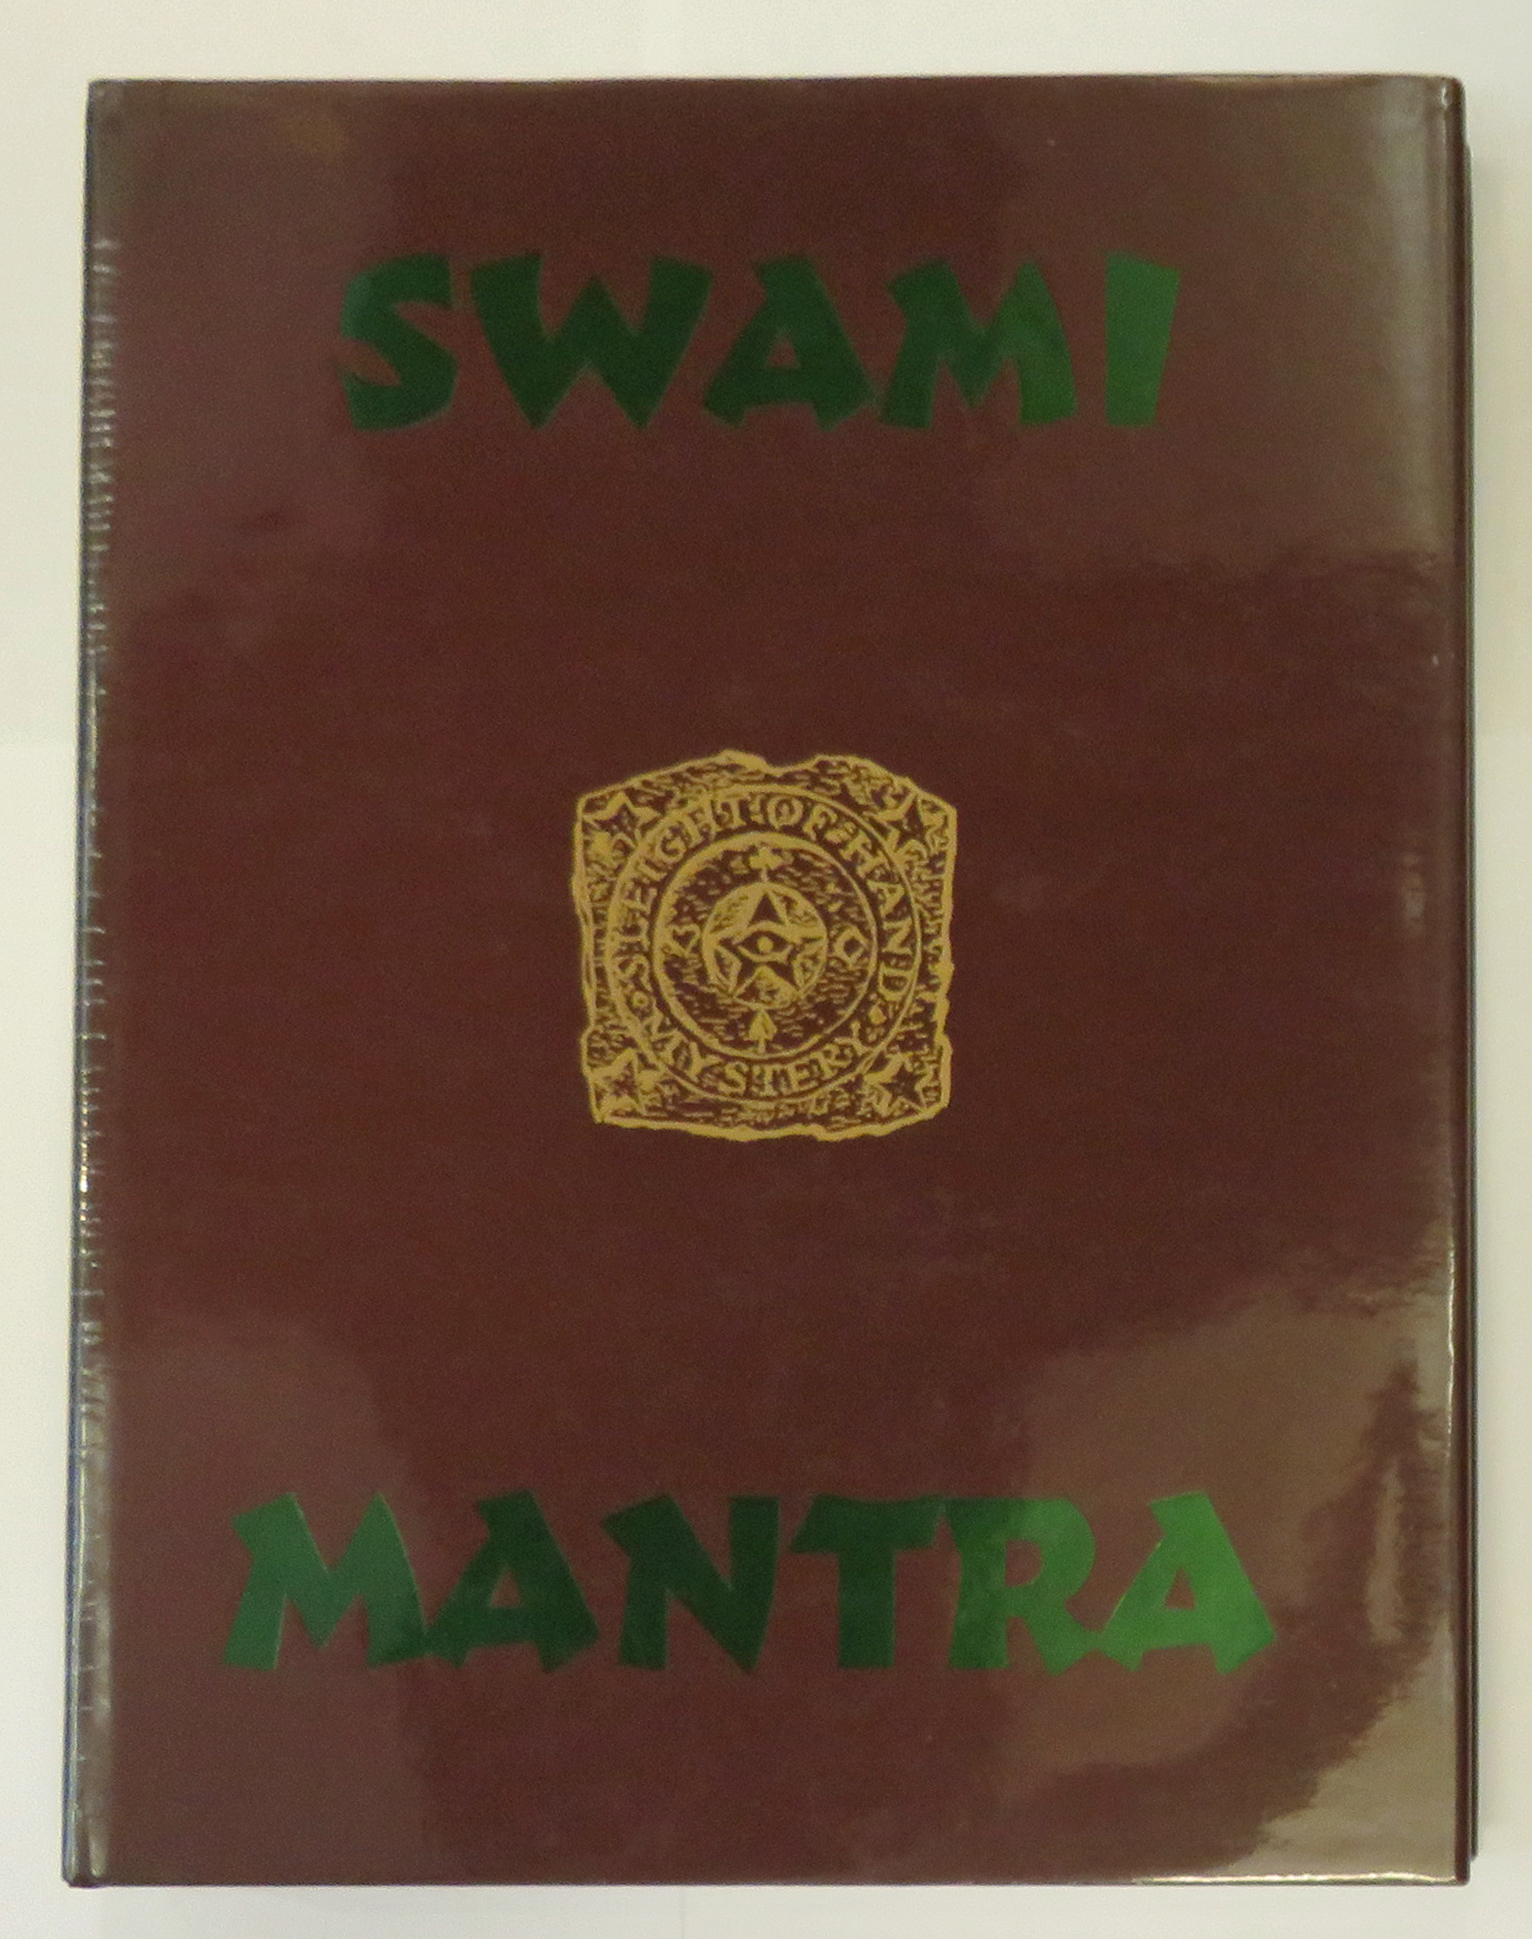 Swami And Mantra 